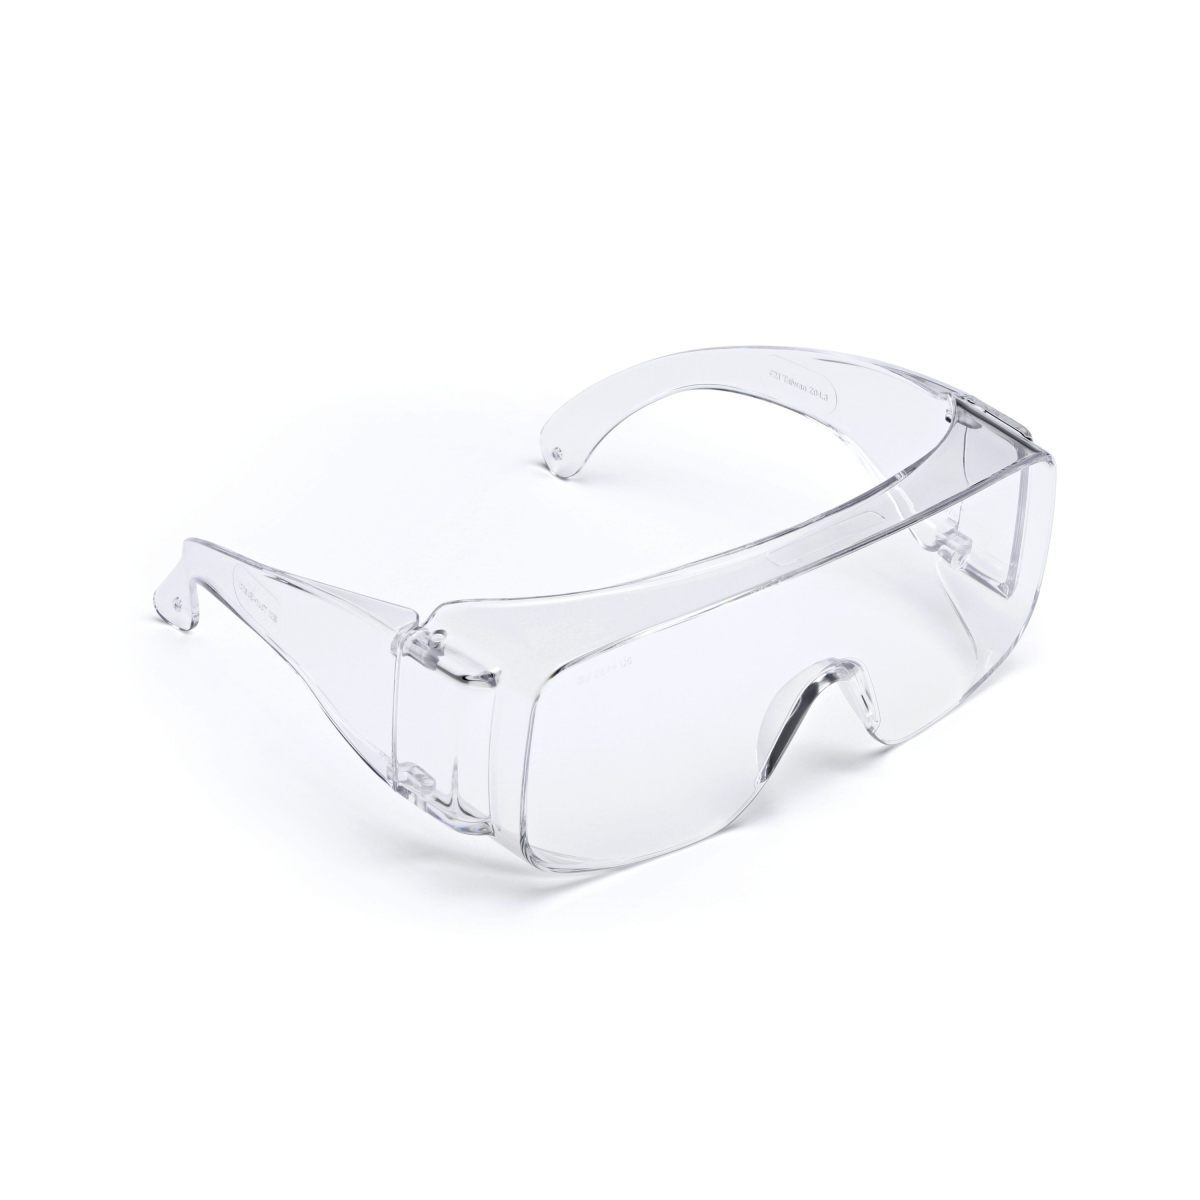 3M™ Tour-Guard™ V Protective Eyewear, TGV01-20 Clear, Dispenser Box (Availability restrictions apply.)